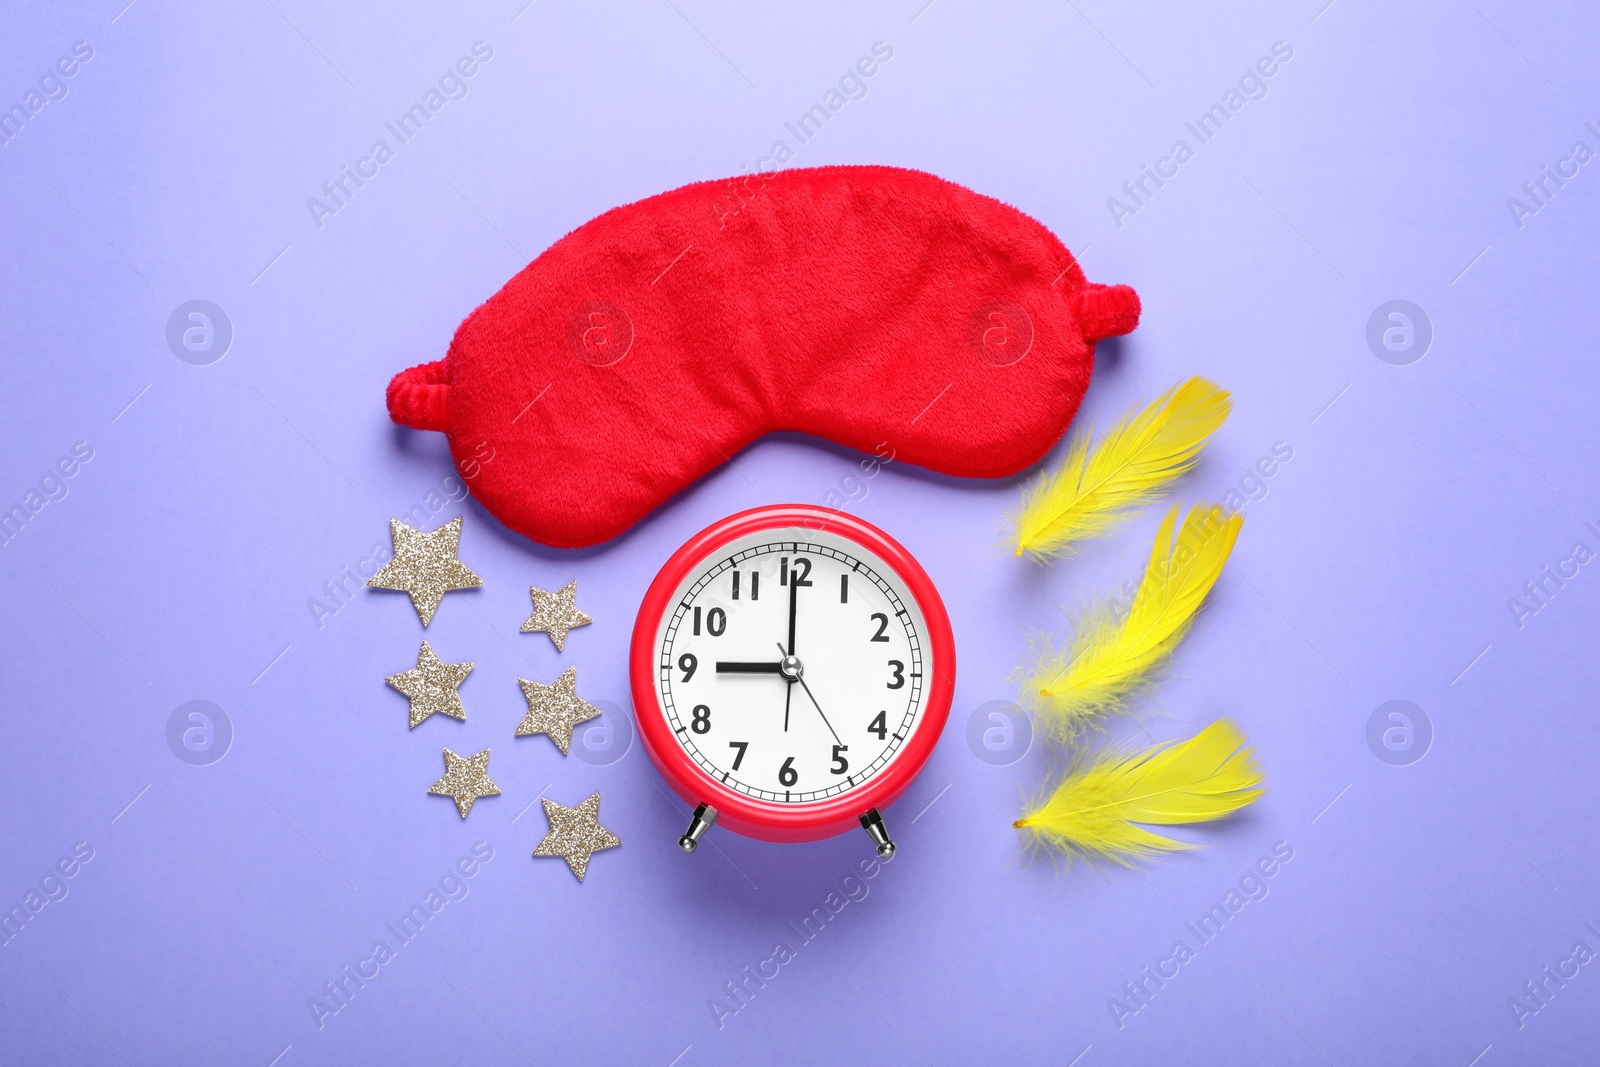 Photo of Soft sleep mask, confetti in shape of stars, feathers and alarm clock on purple background, flat lay